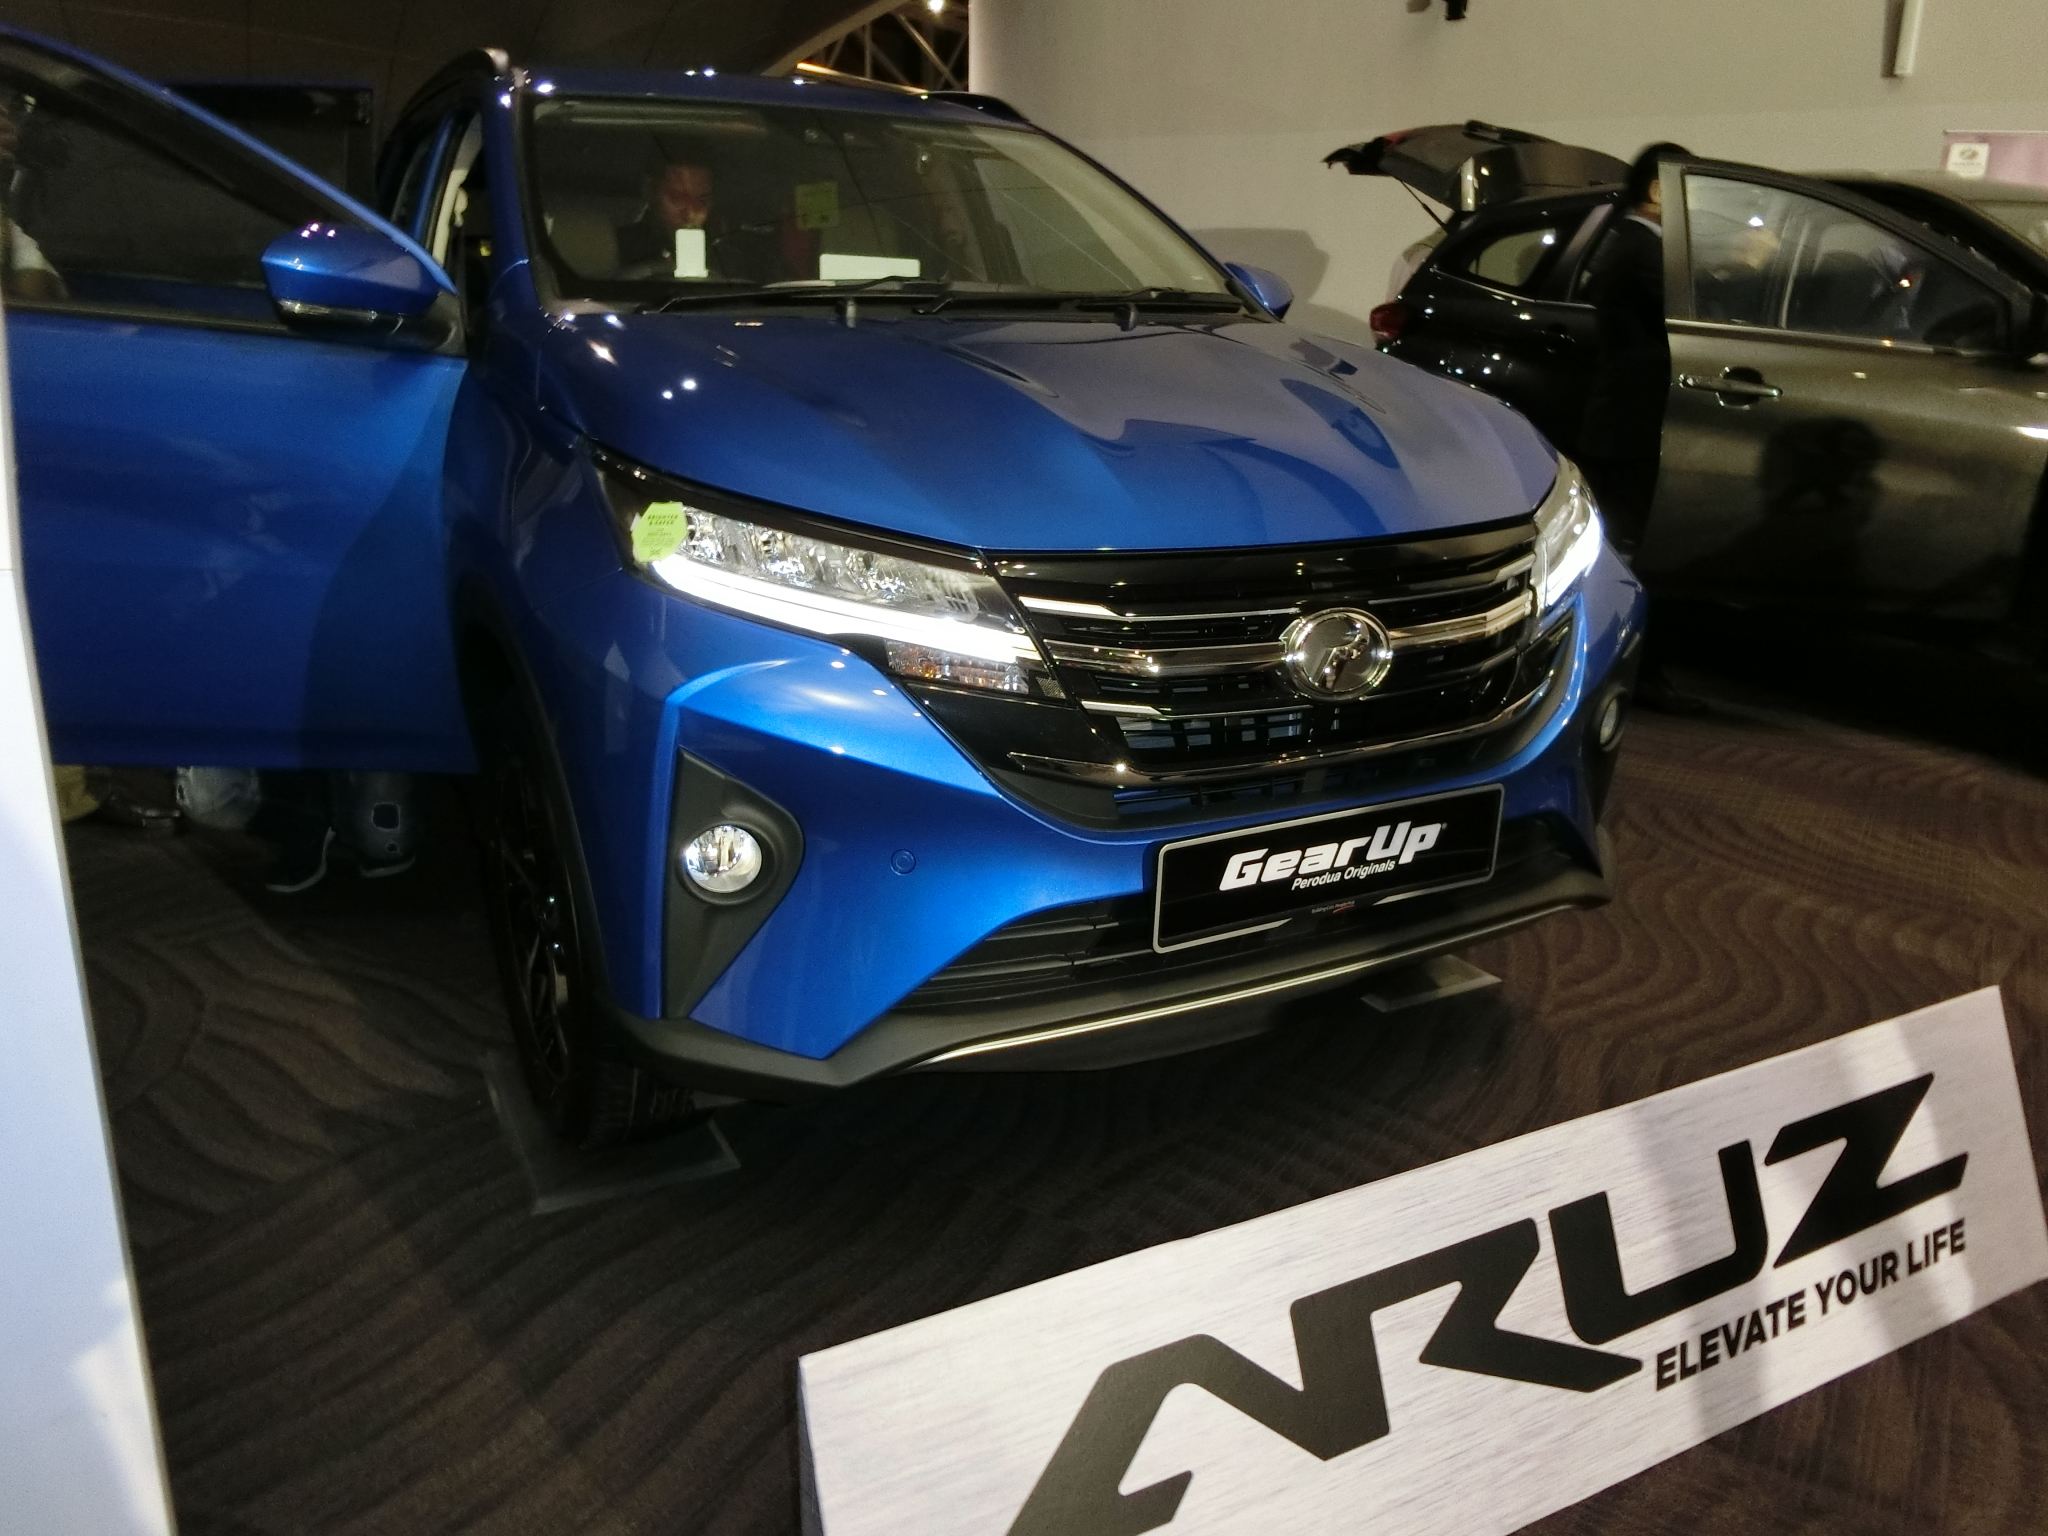 Perodua Launches New Aruz Suv Mpv All You Need To Know In 5min Video News And Reviews On Malaysian Cars Motorcycles And Automotive Lifestyle